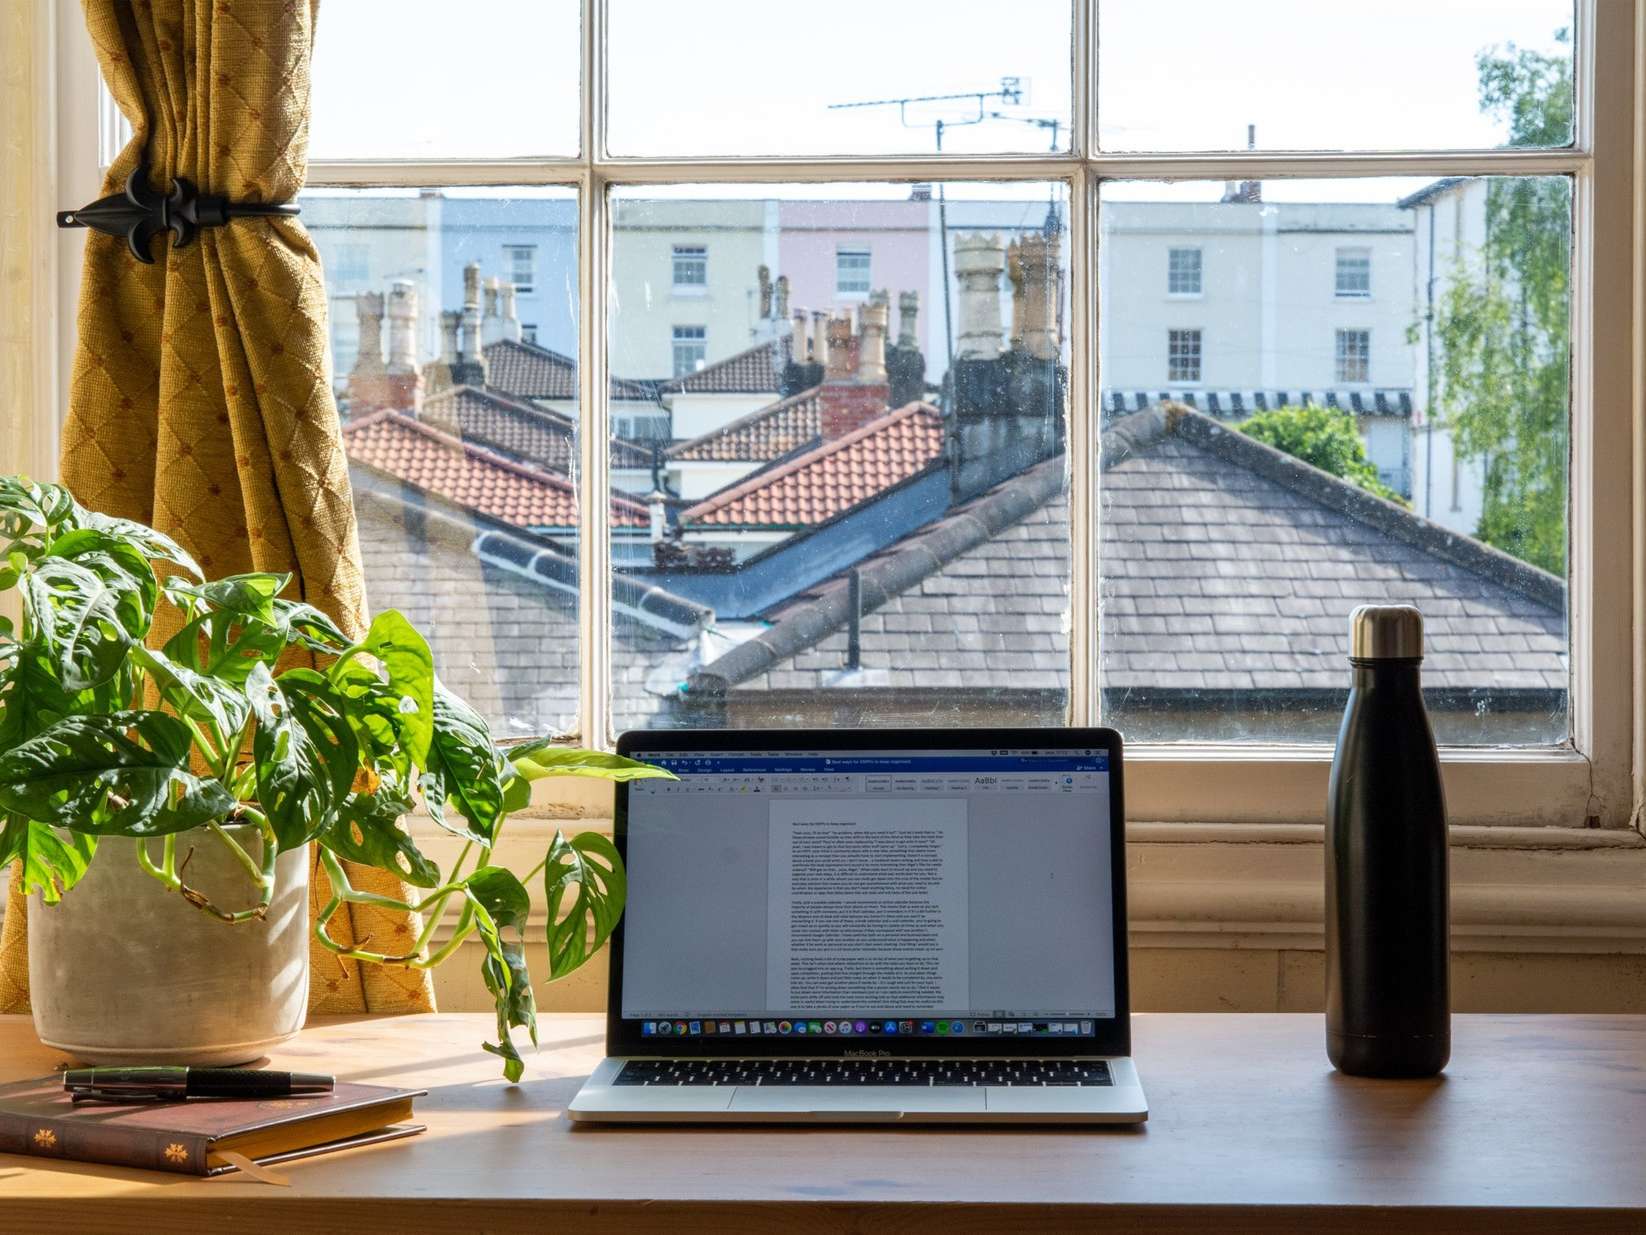 Work-at-home desk space with computer, potted plant and water bottle in front of a window in daytime